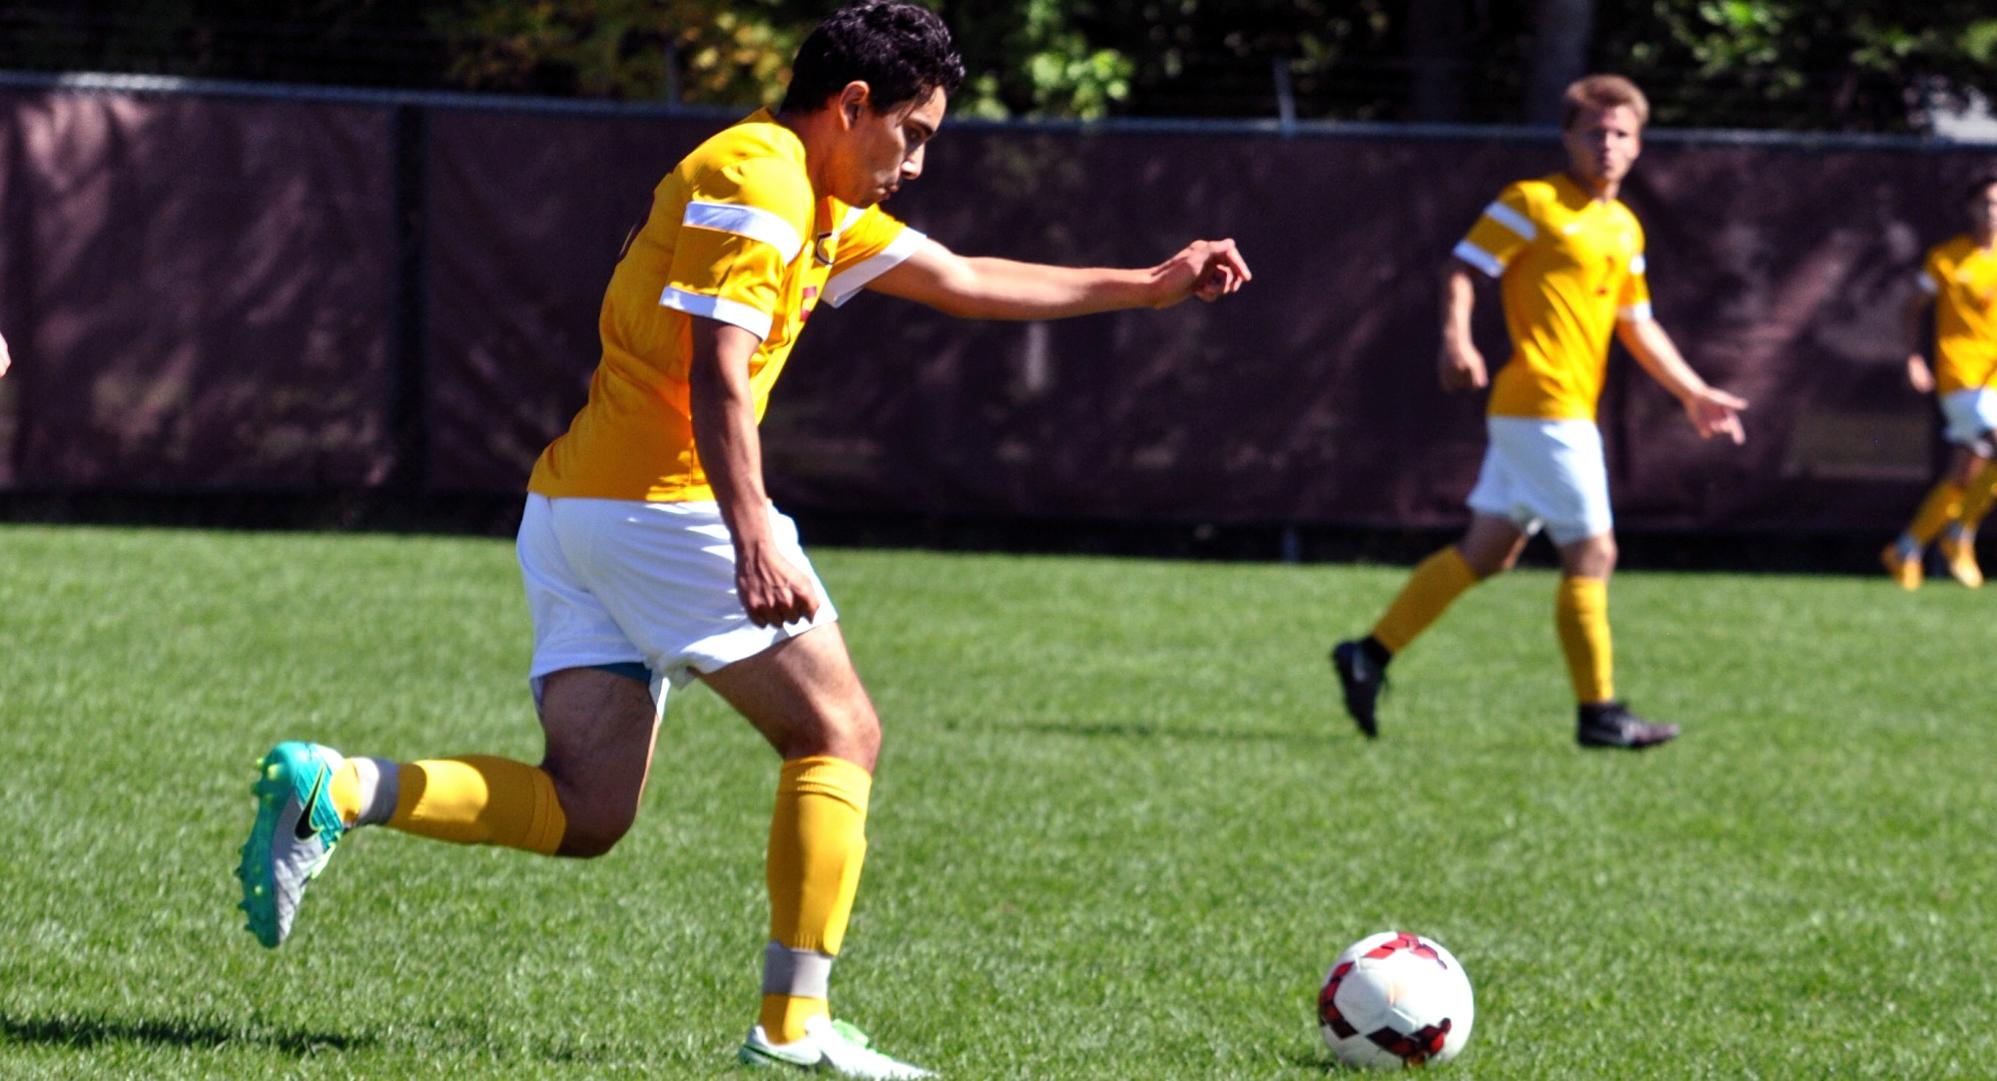 Senior Luis Martinez scored the game-winning goal in the Cobbers' 1-0 victory at Morris. It was Martinez' first goal of the year.